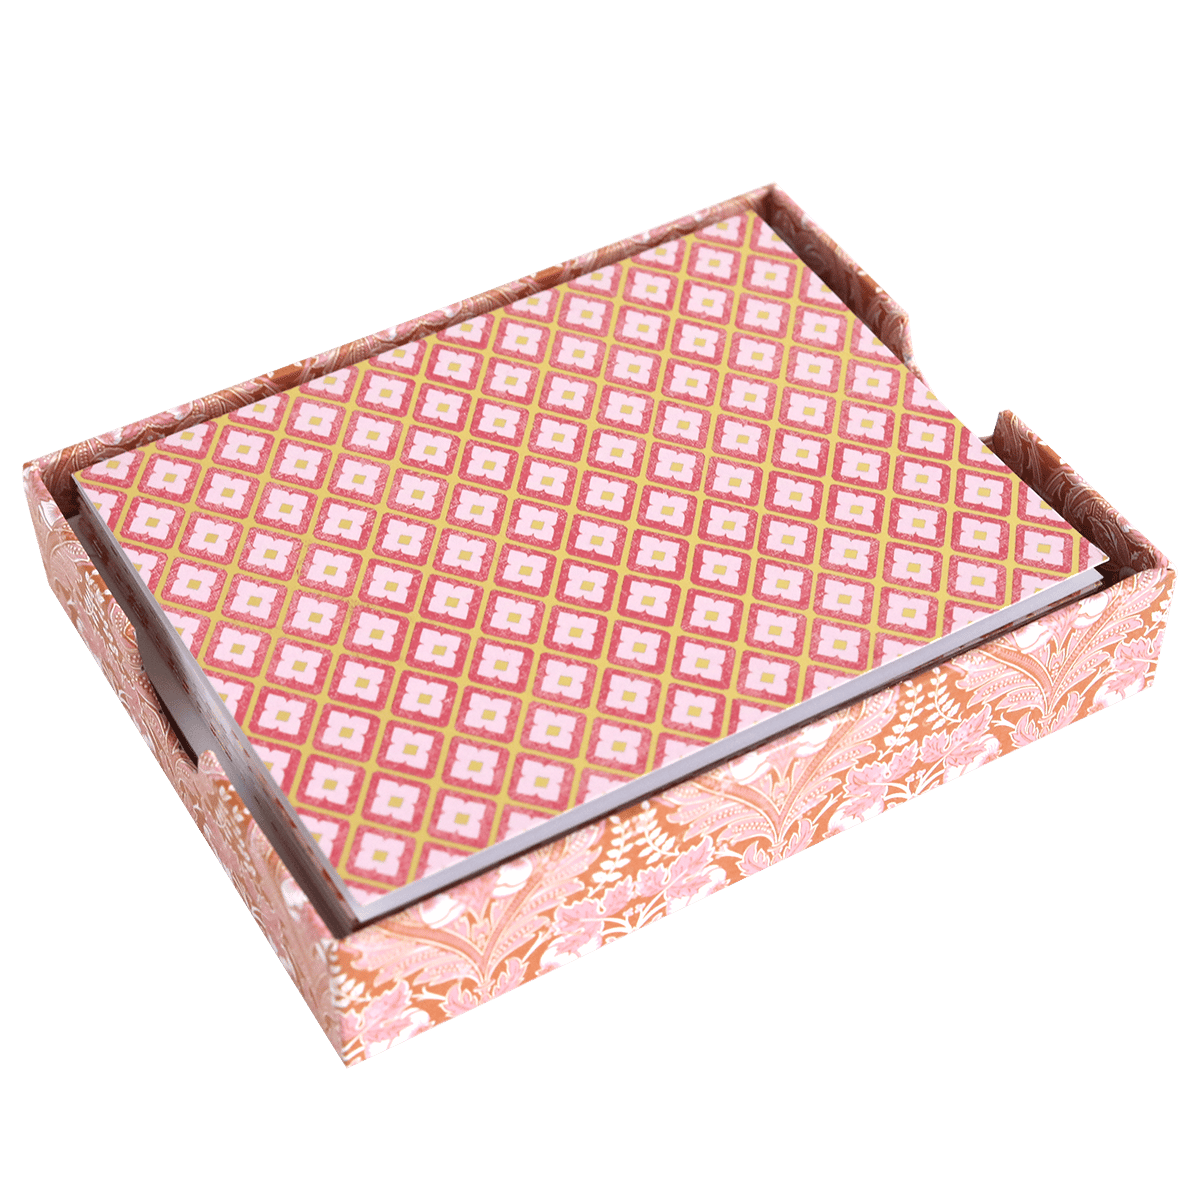 a pink and gold patterned box on a green background.